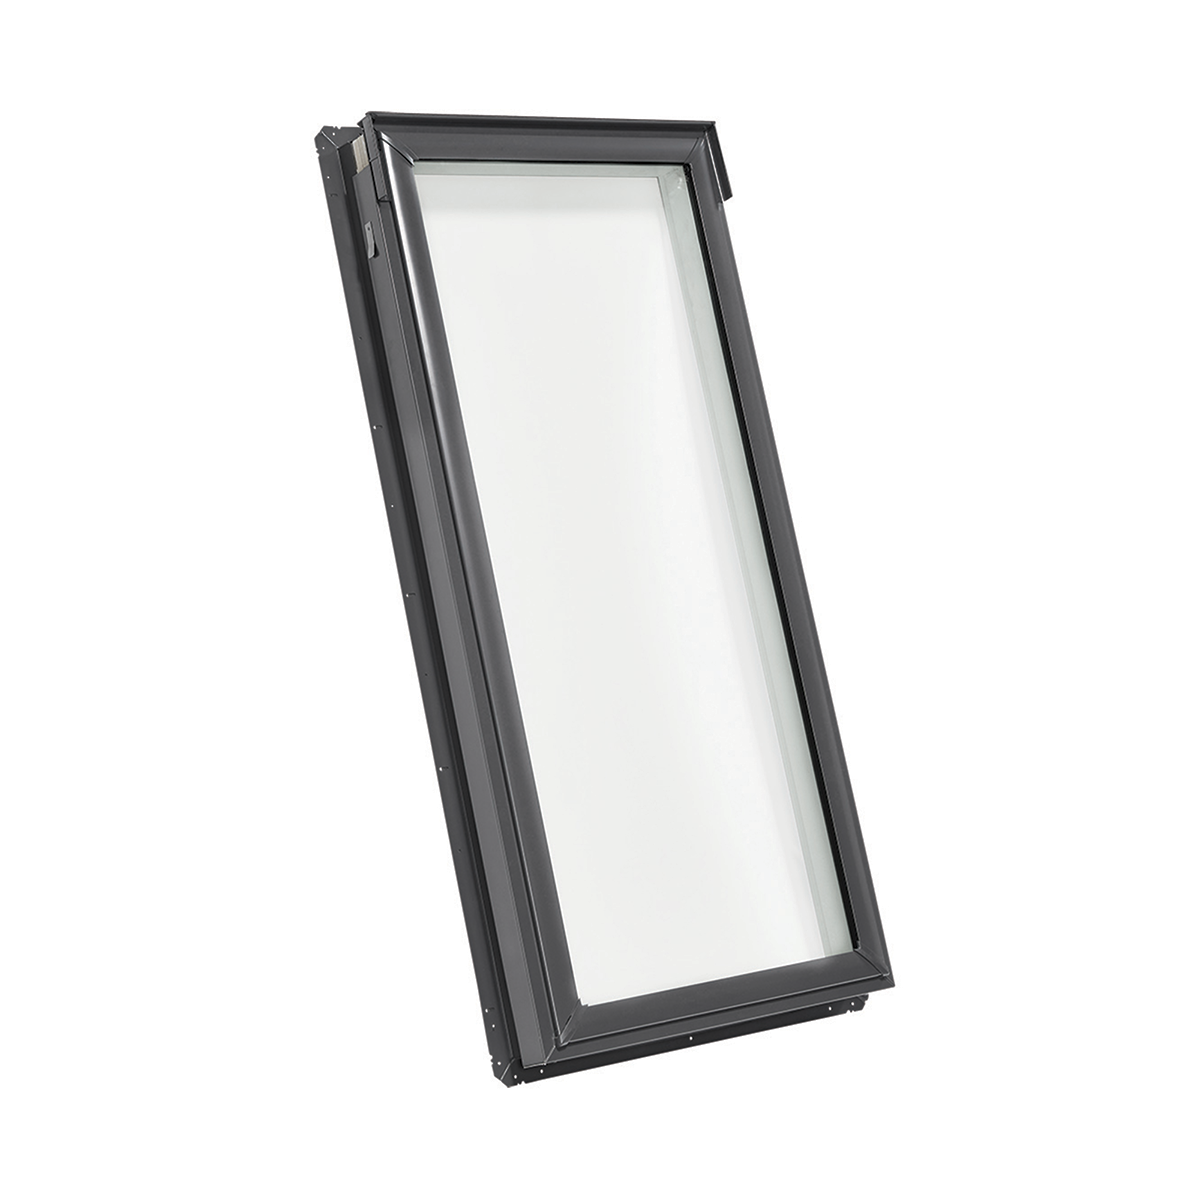 Fixed Deck-Mount Skylight with Laminated Low-E3 Glass - 21 in. x 26-7/8 in. - FS C01